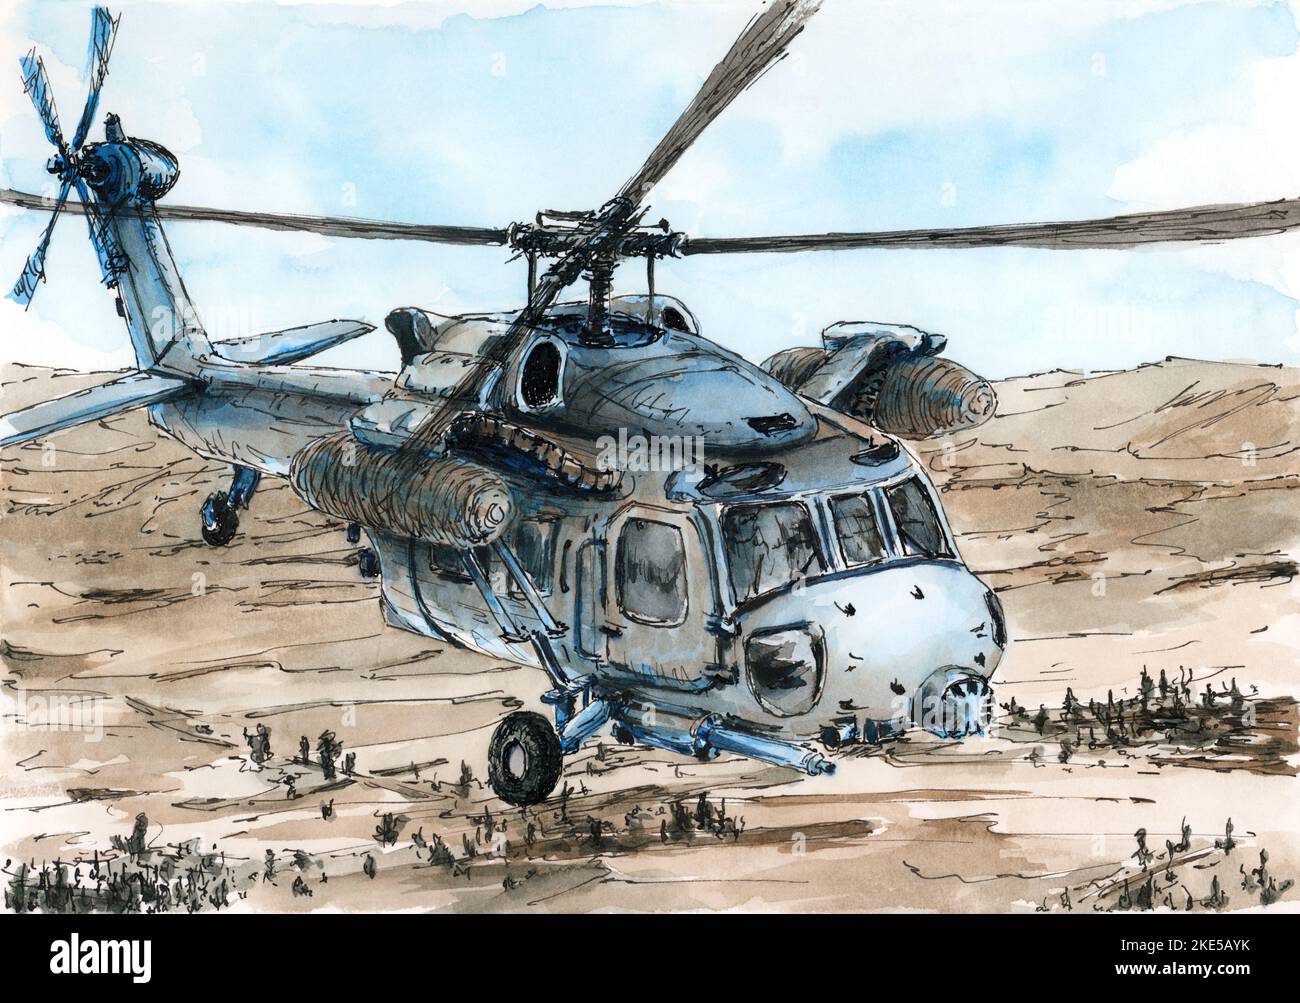 Modern utility military helicopter over land. Ink and watercolor on paper. Stock Photo